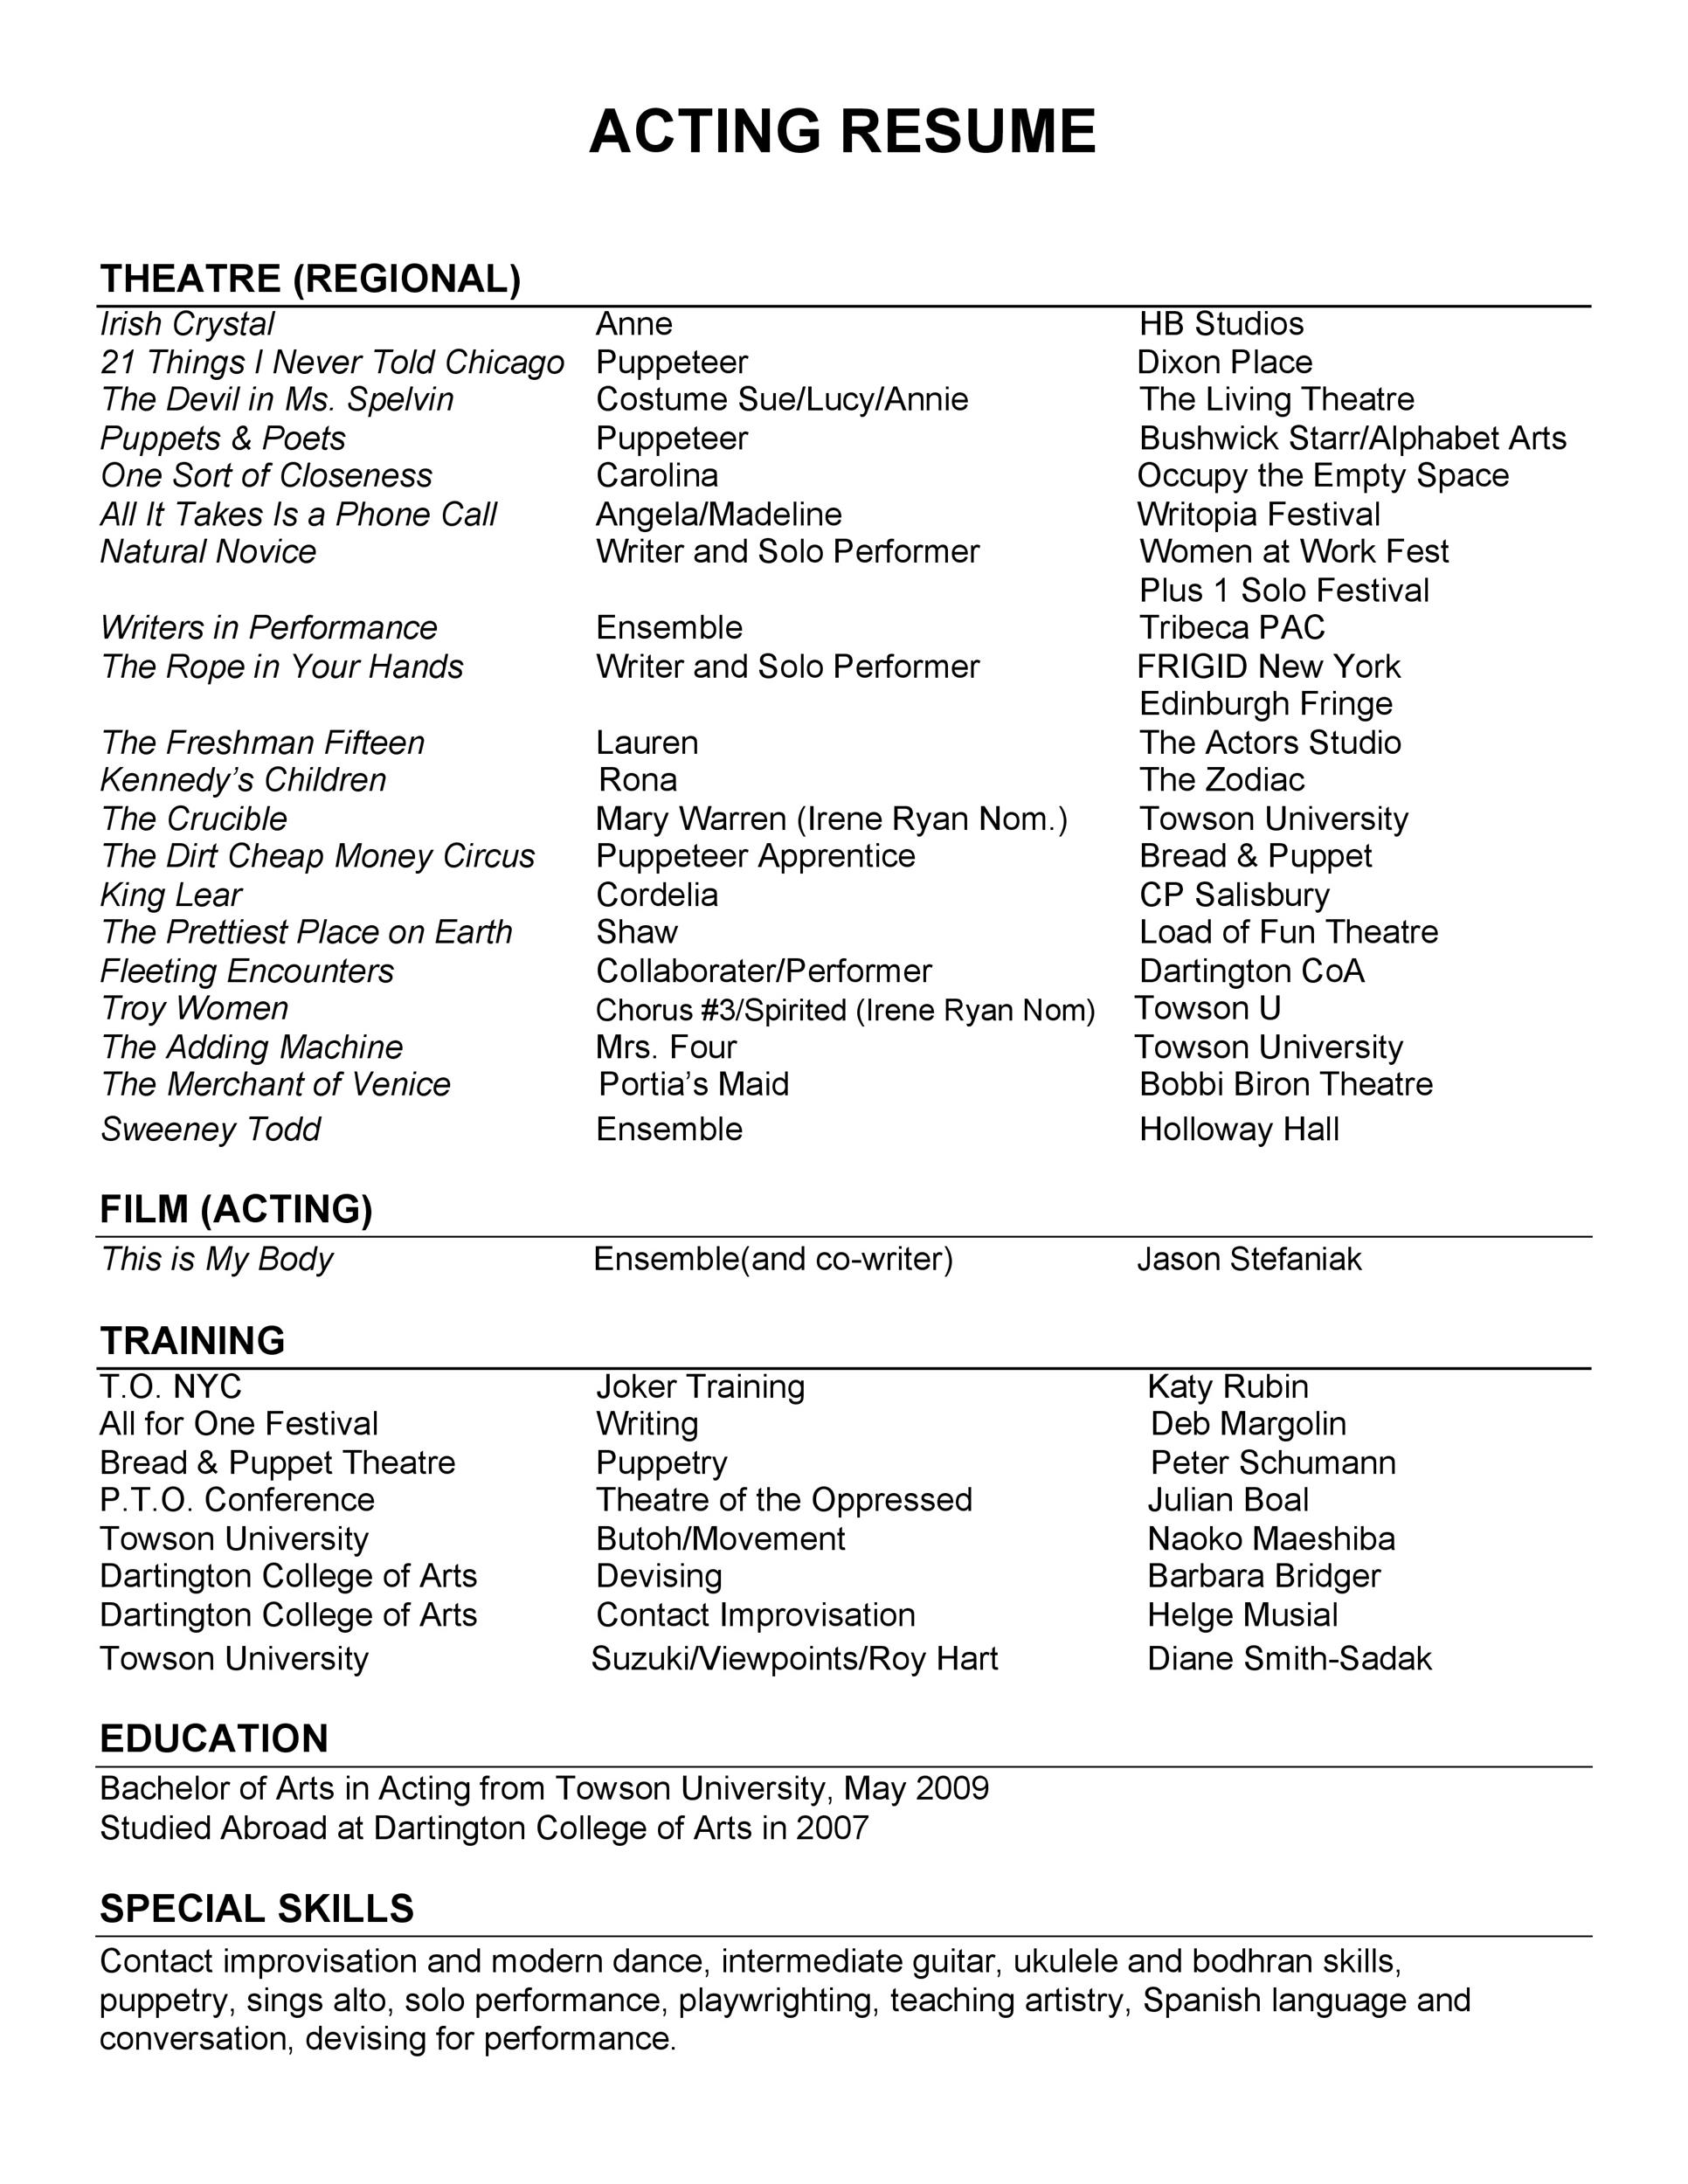 Free acting resume template 04